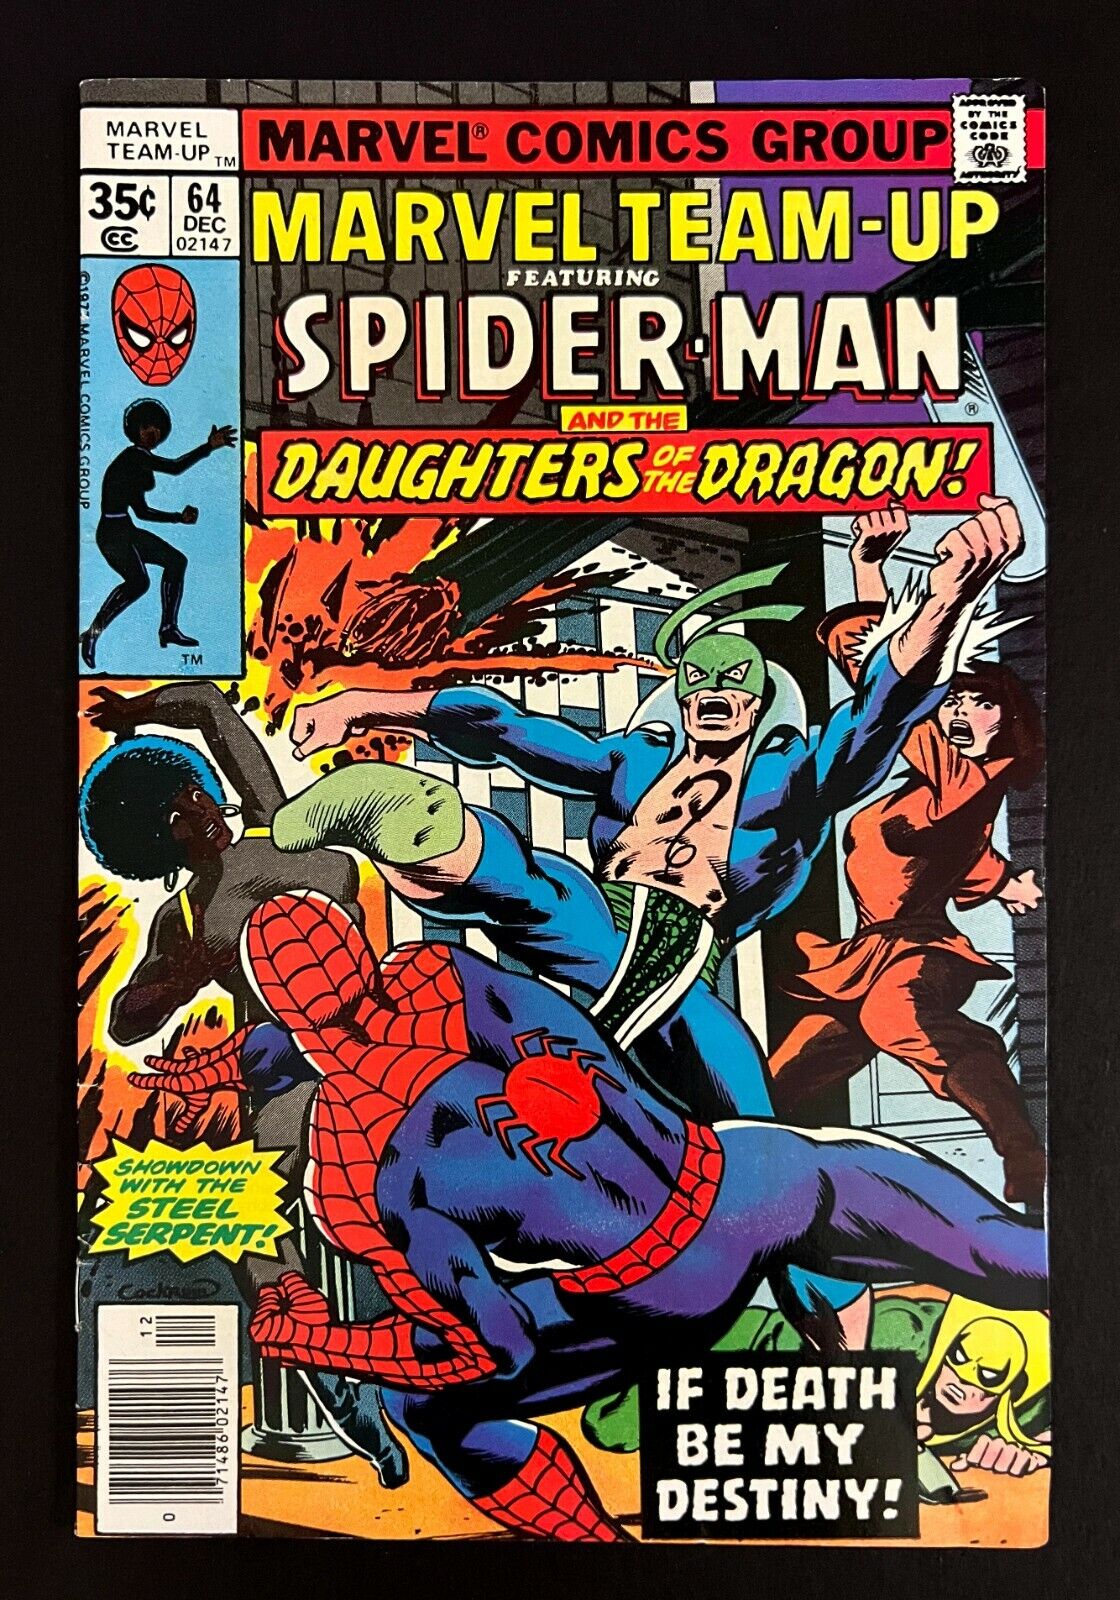 MARVEL TEAM-UP #64 Spider-Man & The Daughters of the Dragon John Byrne Art 1977